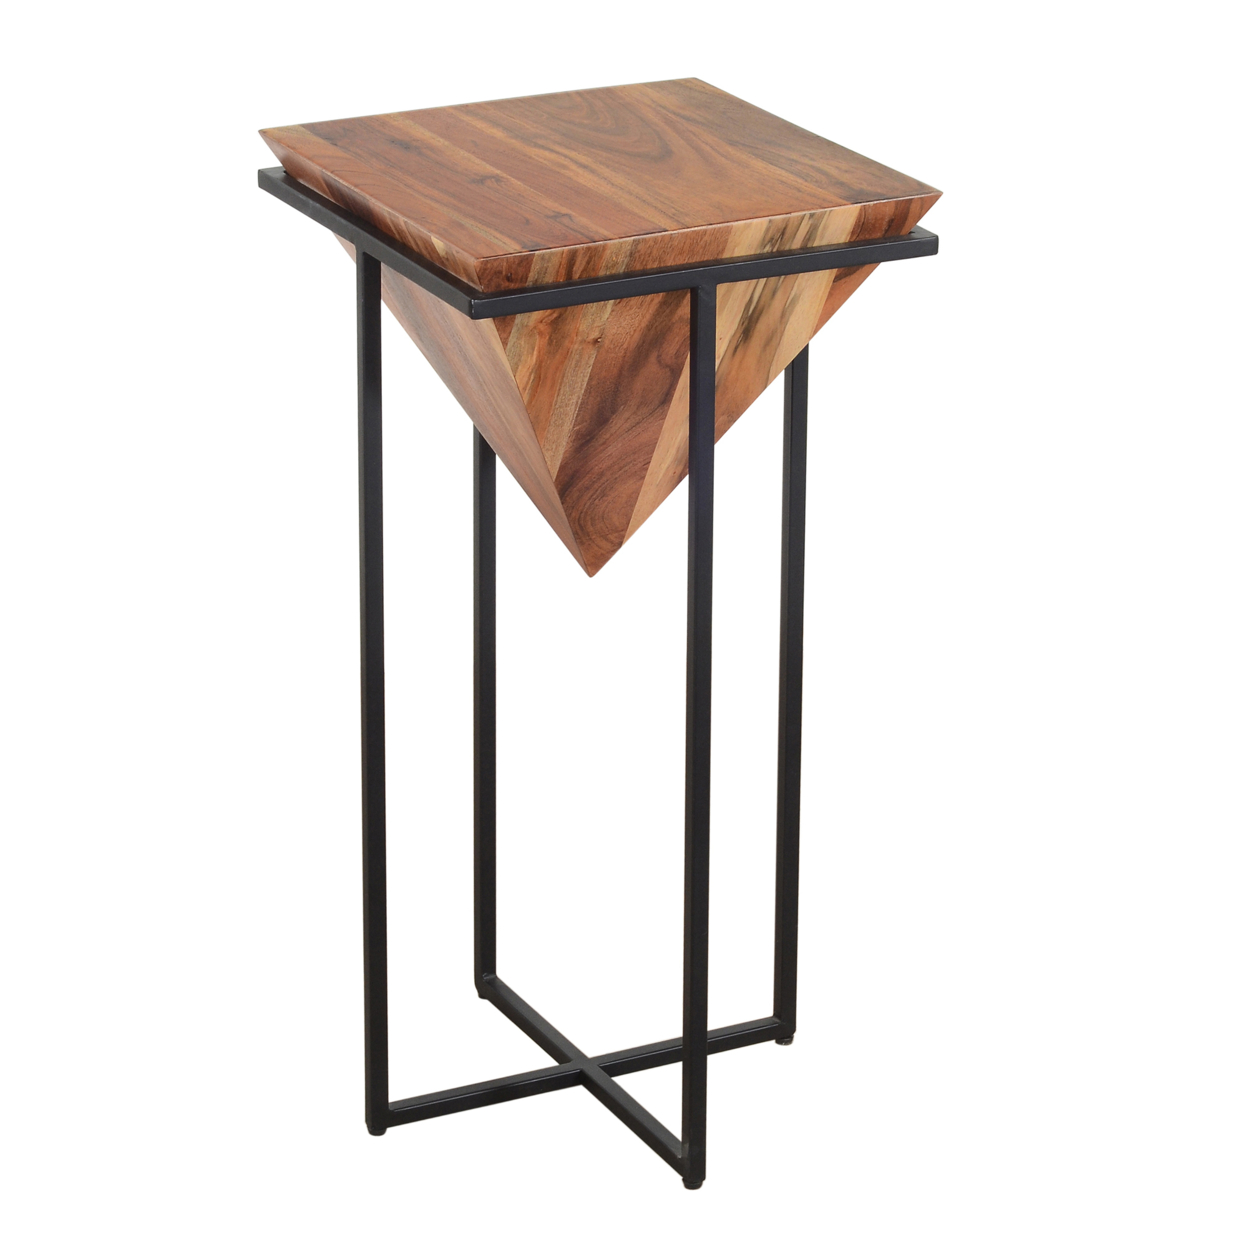 30 Inch Pyramid Shape Wooden Side Table With Cross Metal Base, Brown And Black- Saltoro Sherpi